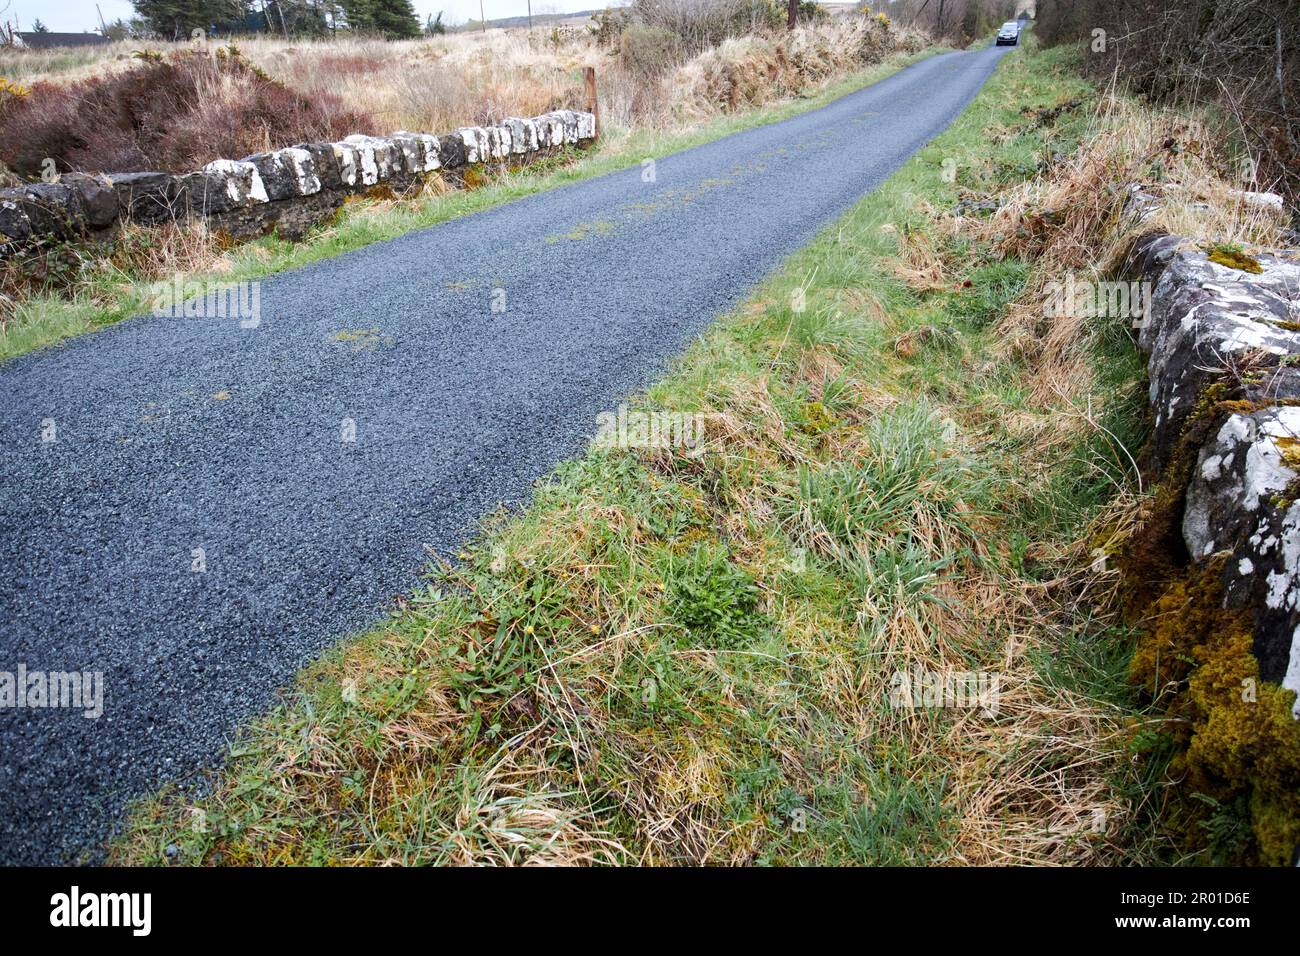 resurfaced rough tarmac road over bridge raised up in rural county donegal republic of ireland Stock Photo